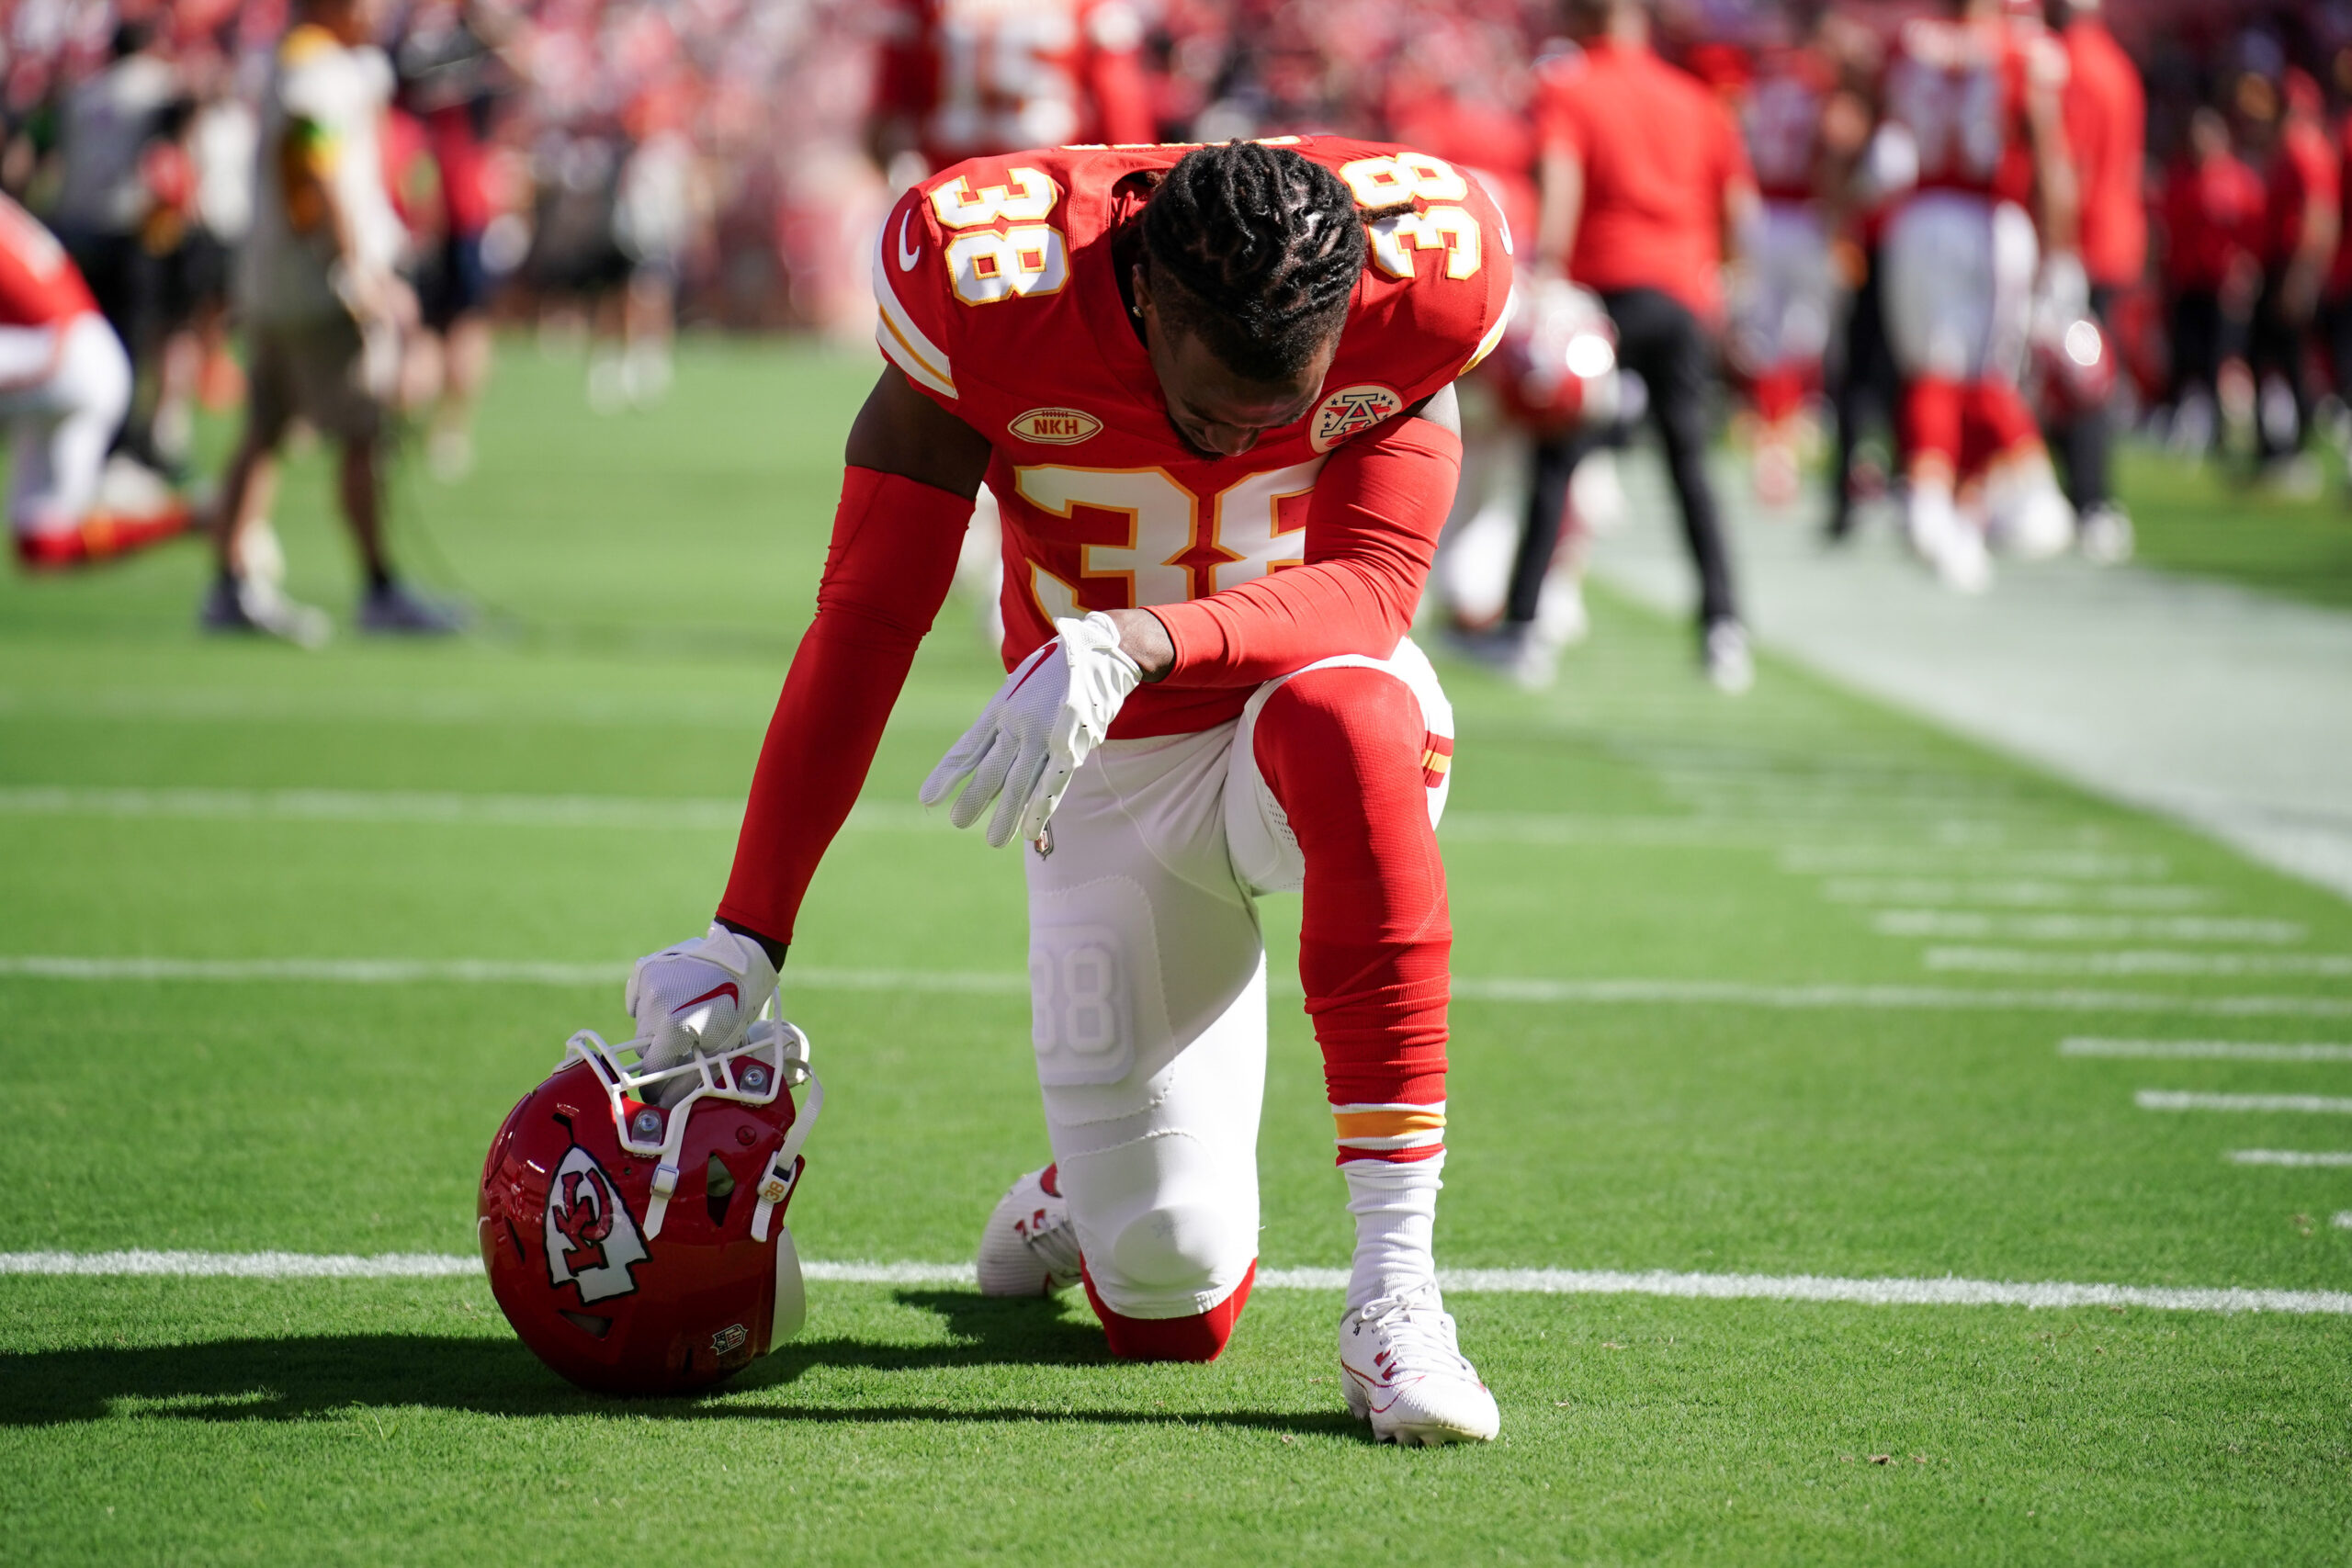 Chiefs News Roundup Feb. 29: What Does the Future Hold For Star CB L'Jarius Sneed?